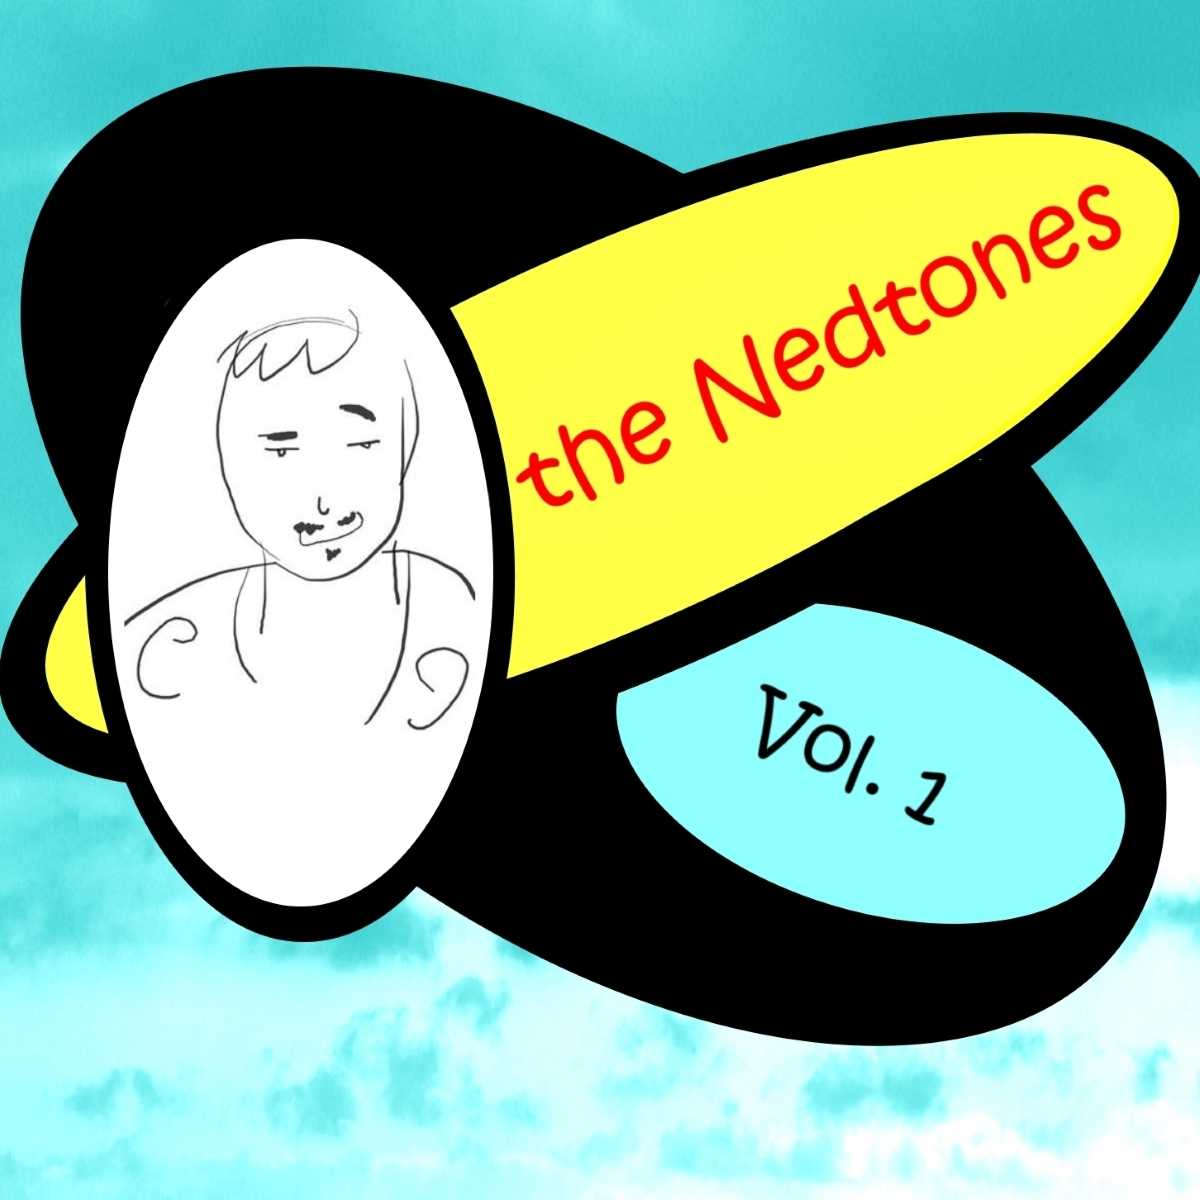 updated, official CD cover for Nedtones Vol. 1